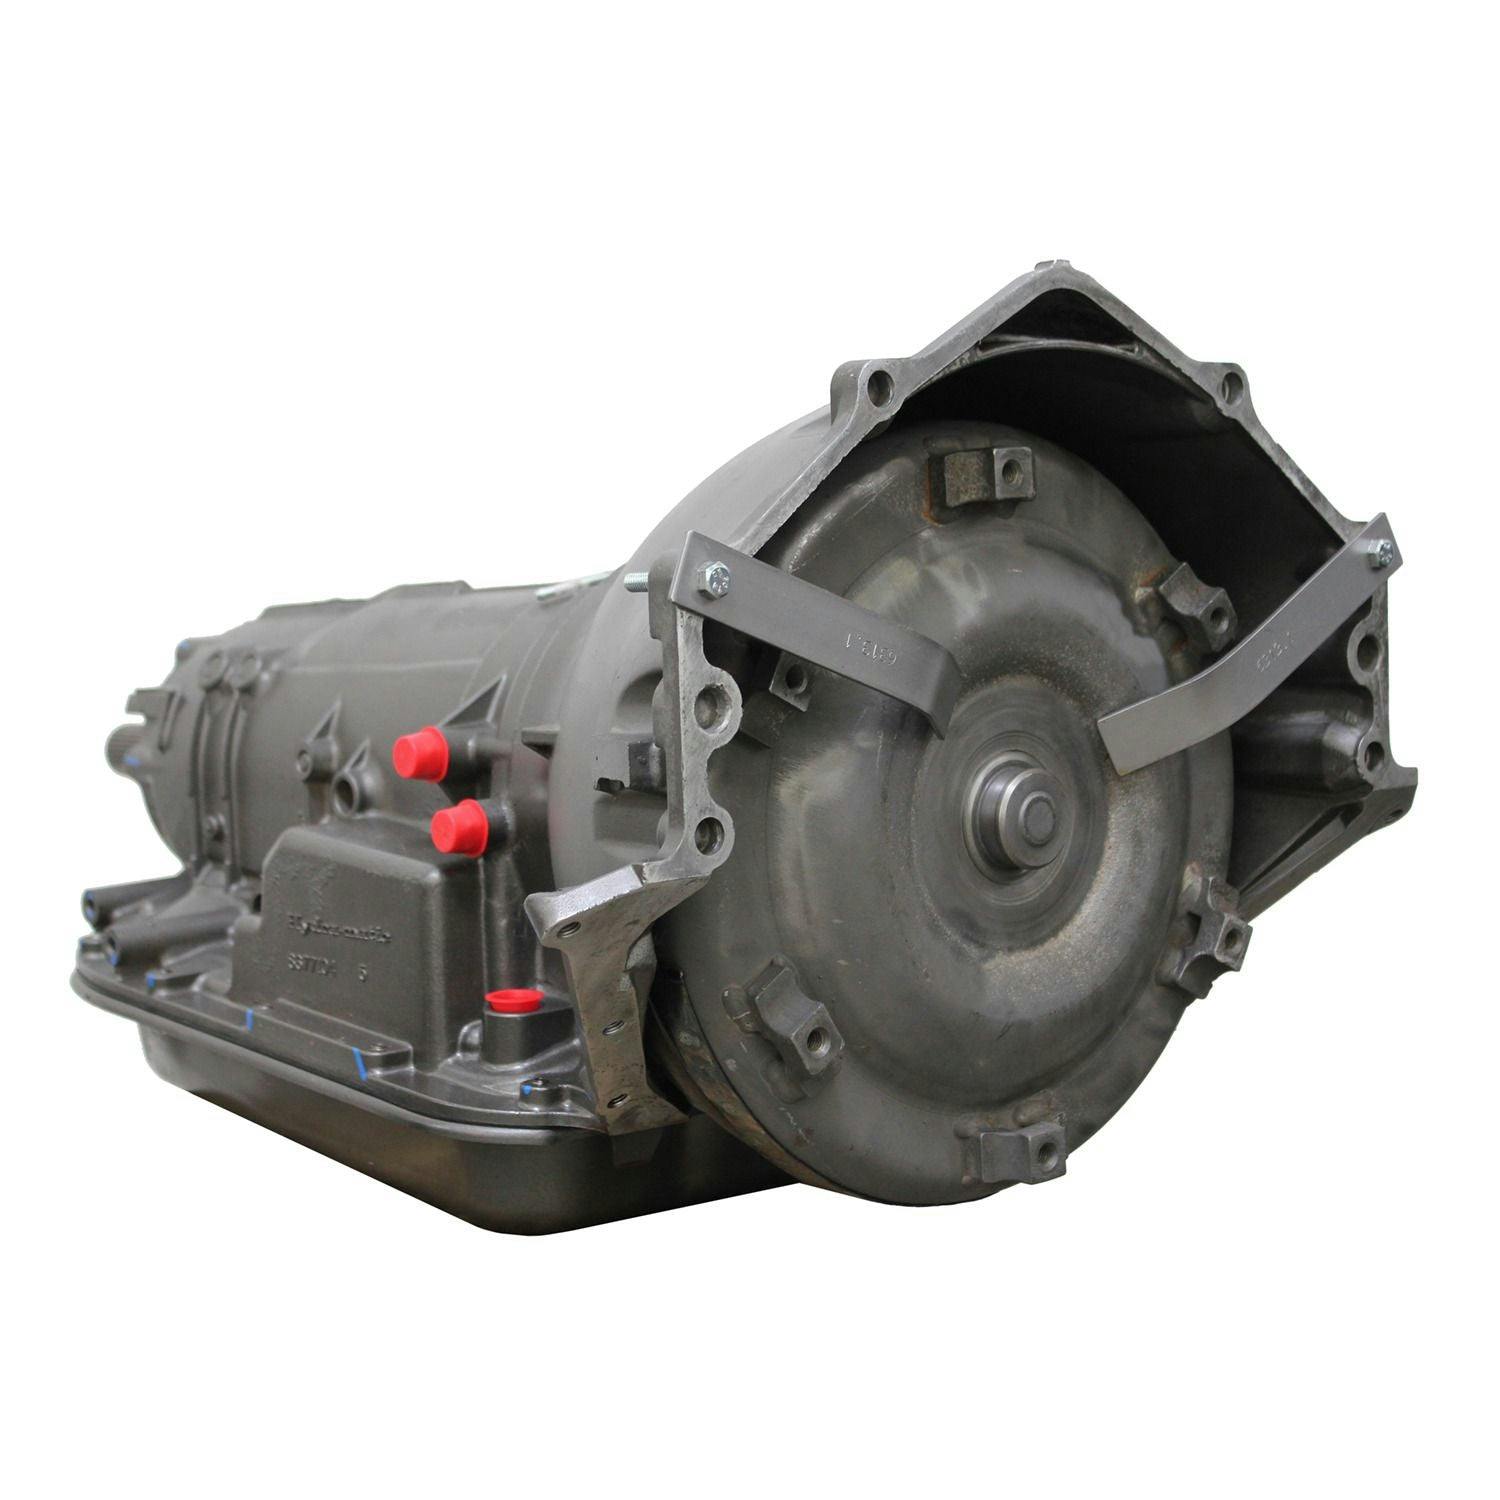 Automatic Transmission for 1995-1996 Chevrolet P30 and GMC P3500/W3500 Forward RWD with 5.7/7.4L V8 Engine